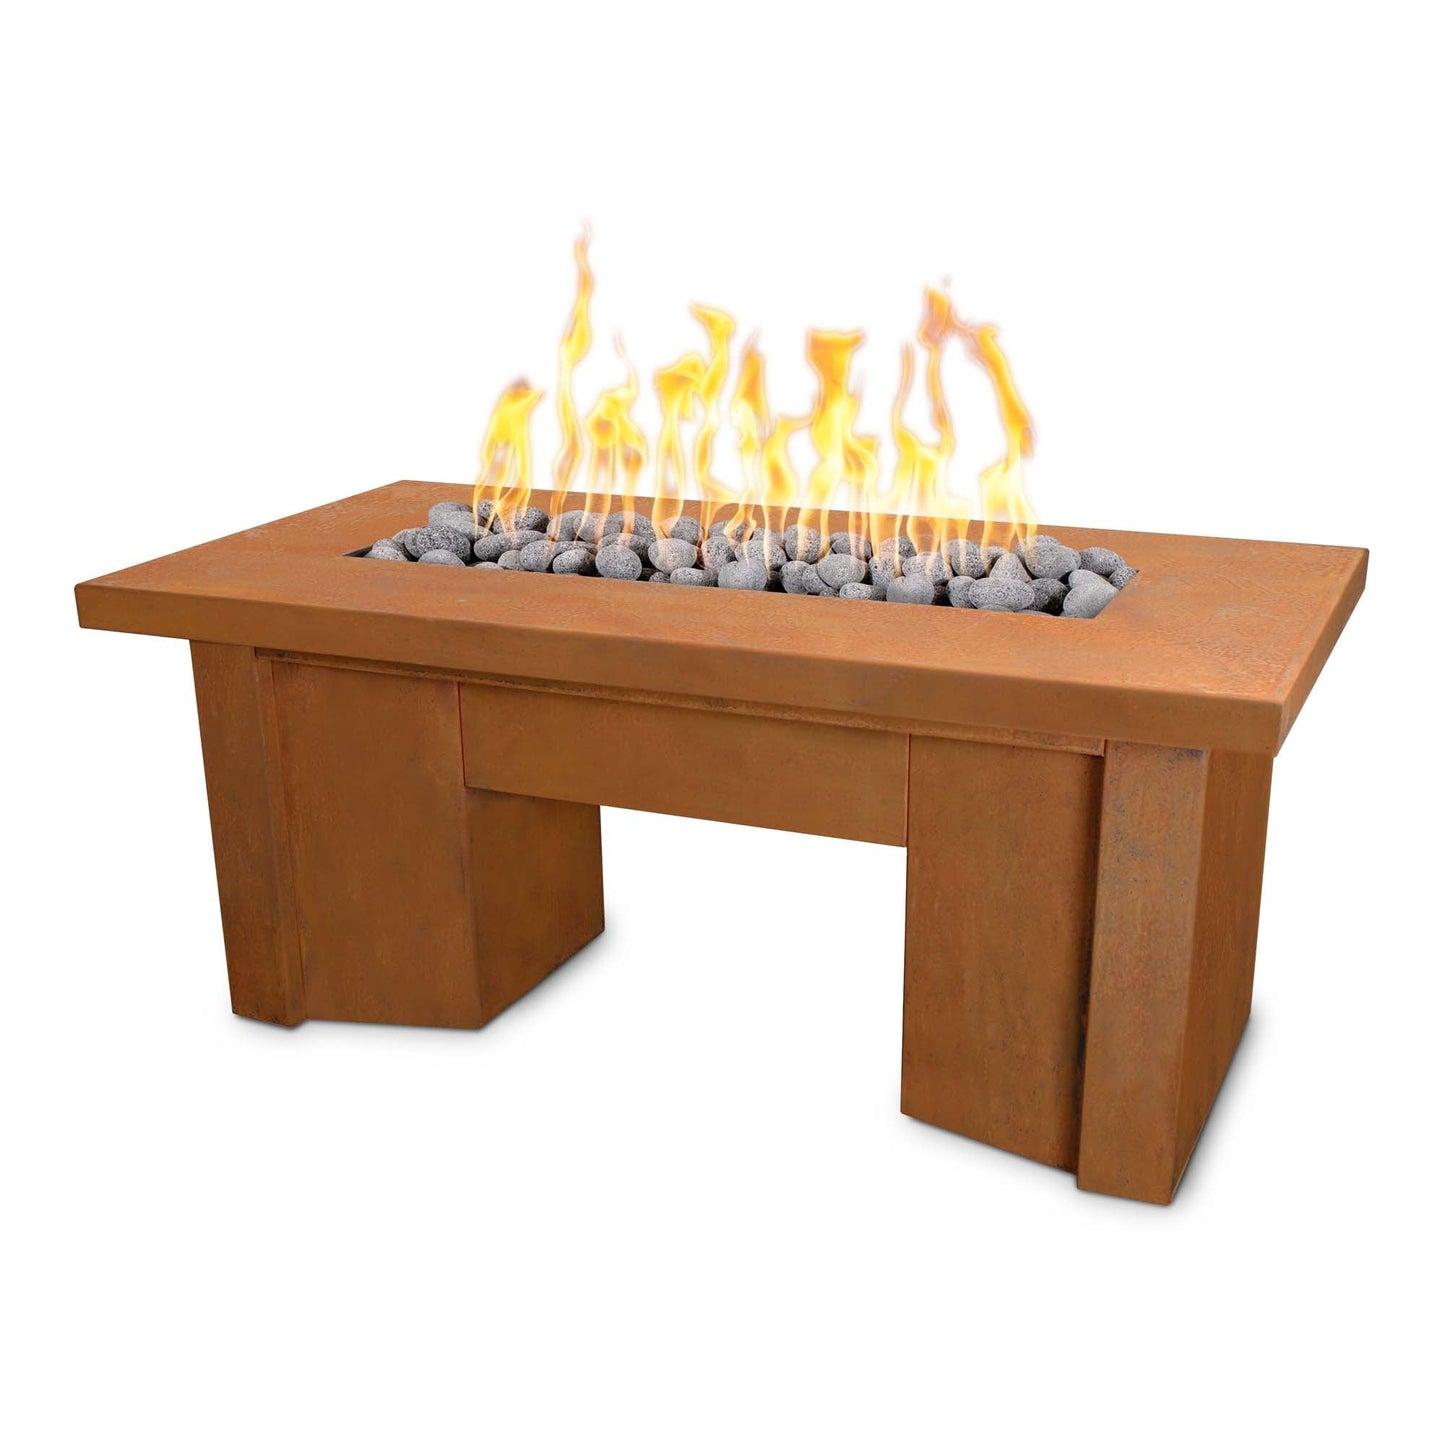 The Outdoor Plus Rectangular Alameda 48" Corten Steel Natural Gas Fire Pit with 110V Electronic Ignition